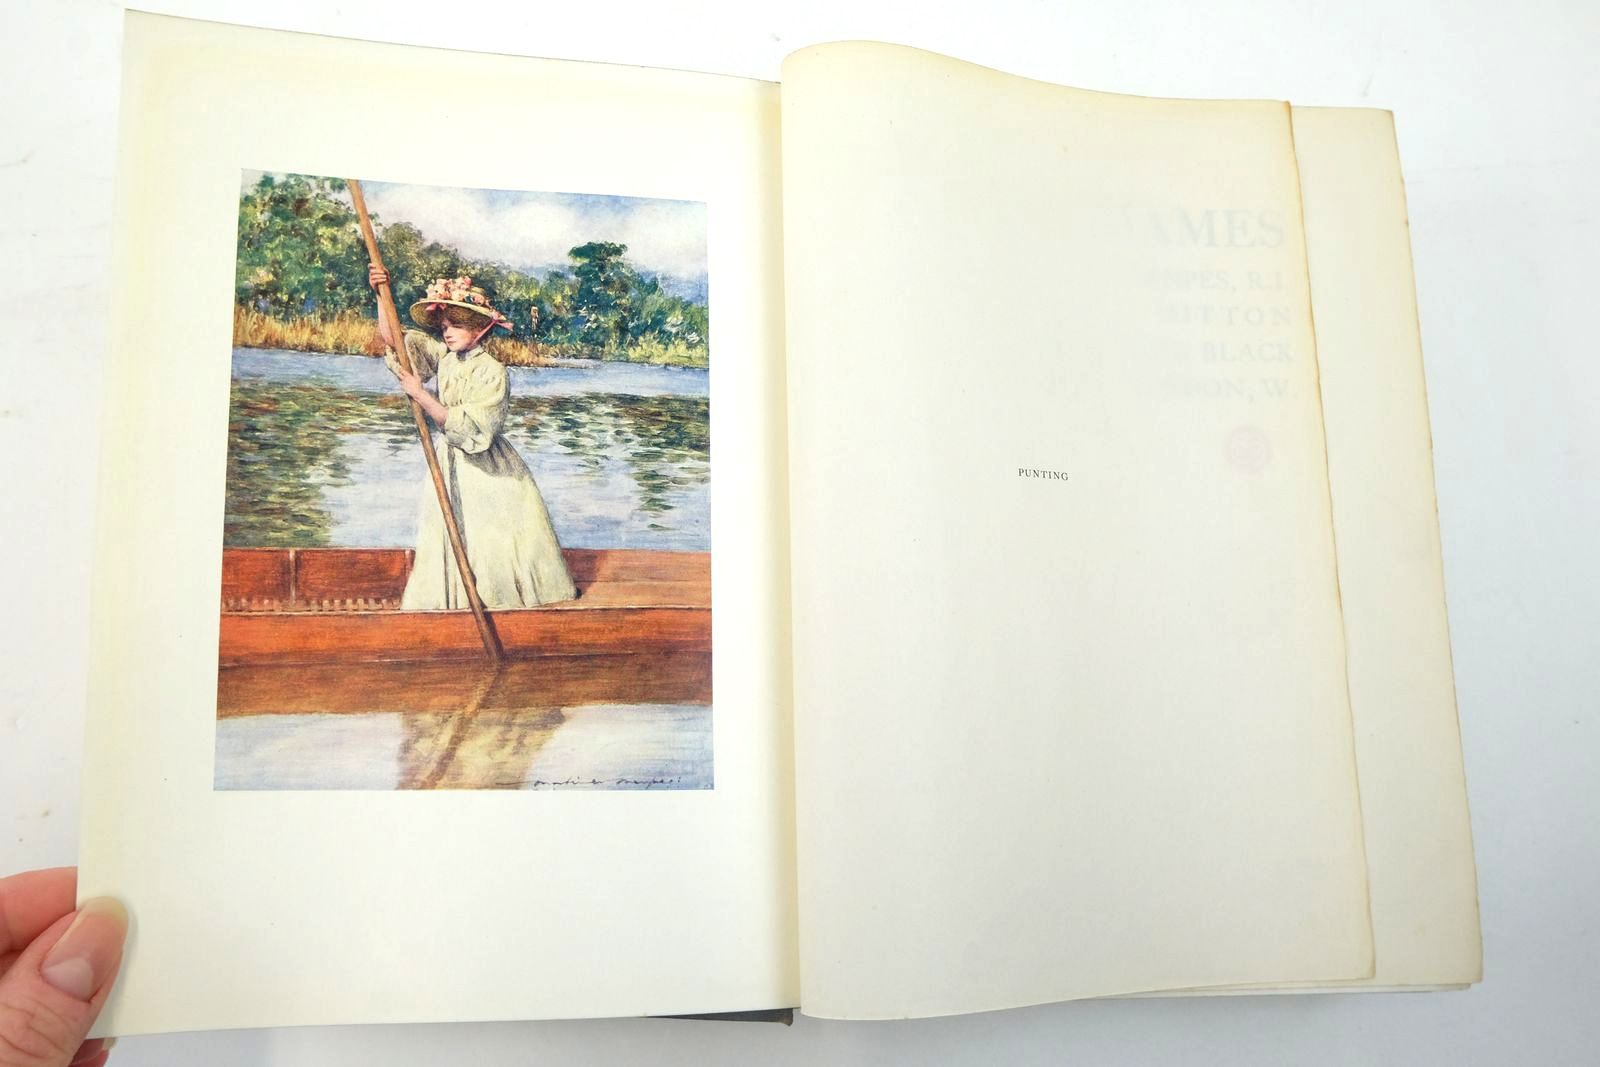 Photo of THE THAMES written by Mitton, G.E. illustrated by Menpes, Mortimer published by A. & C. Black (STOCK CODE: 2137559)  for sale by Stella & Rose's Books